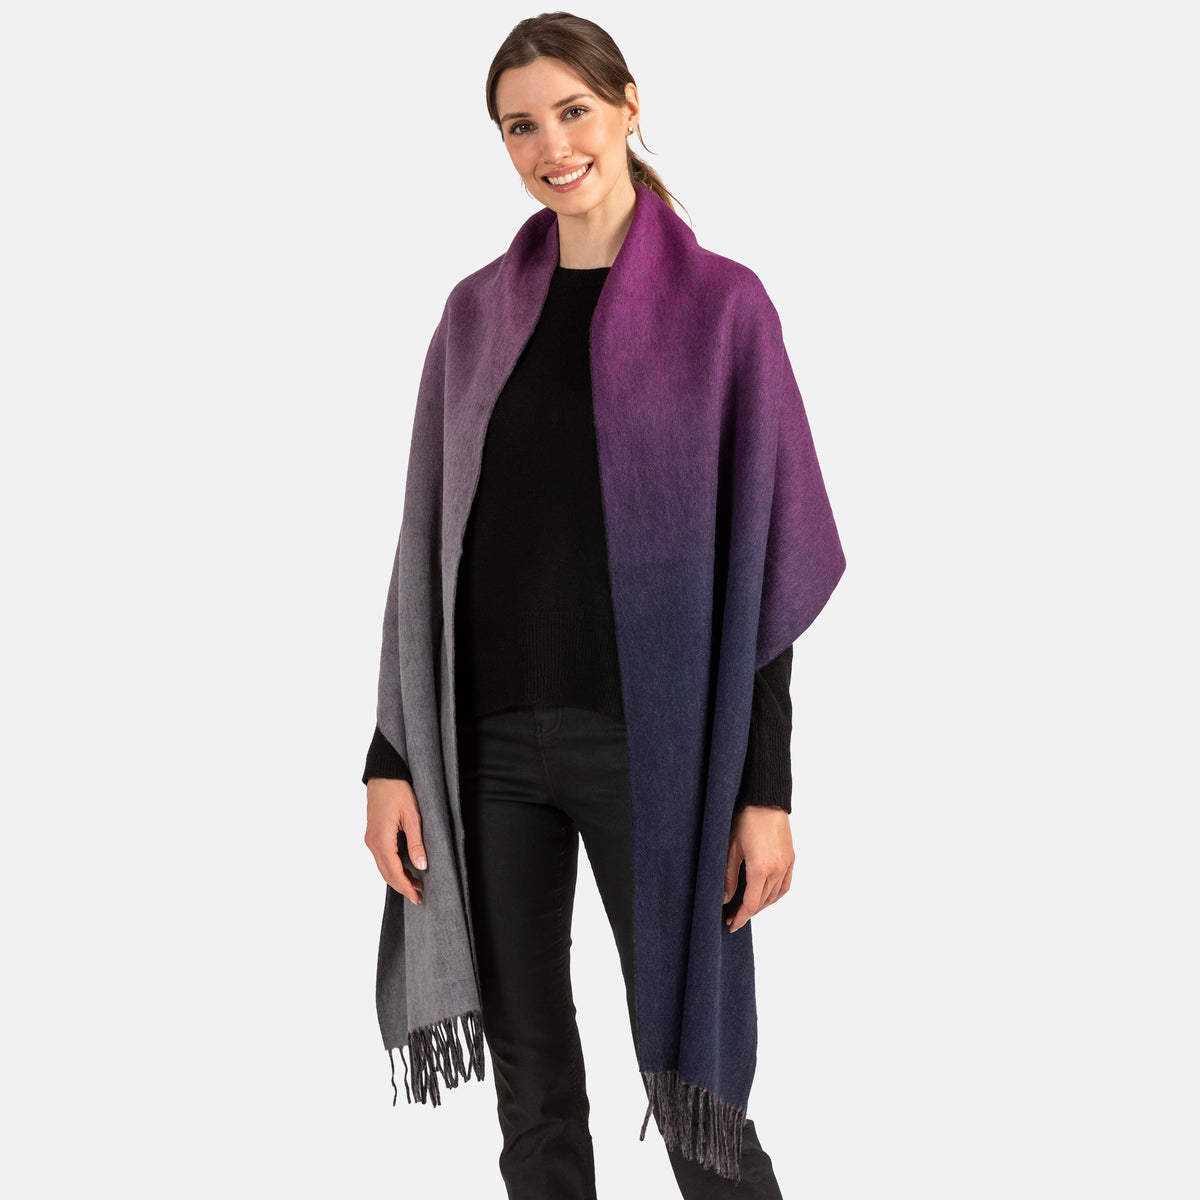 Picture of a woman wearing a double face, long woven blend wrap with fringe,in a purple and grey ombre design.